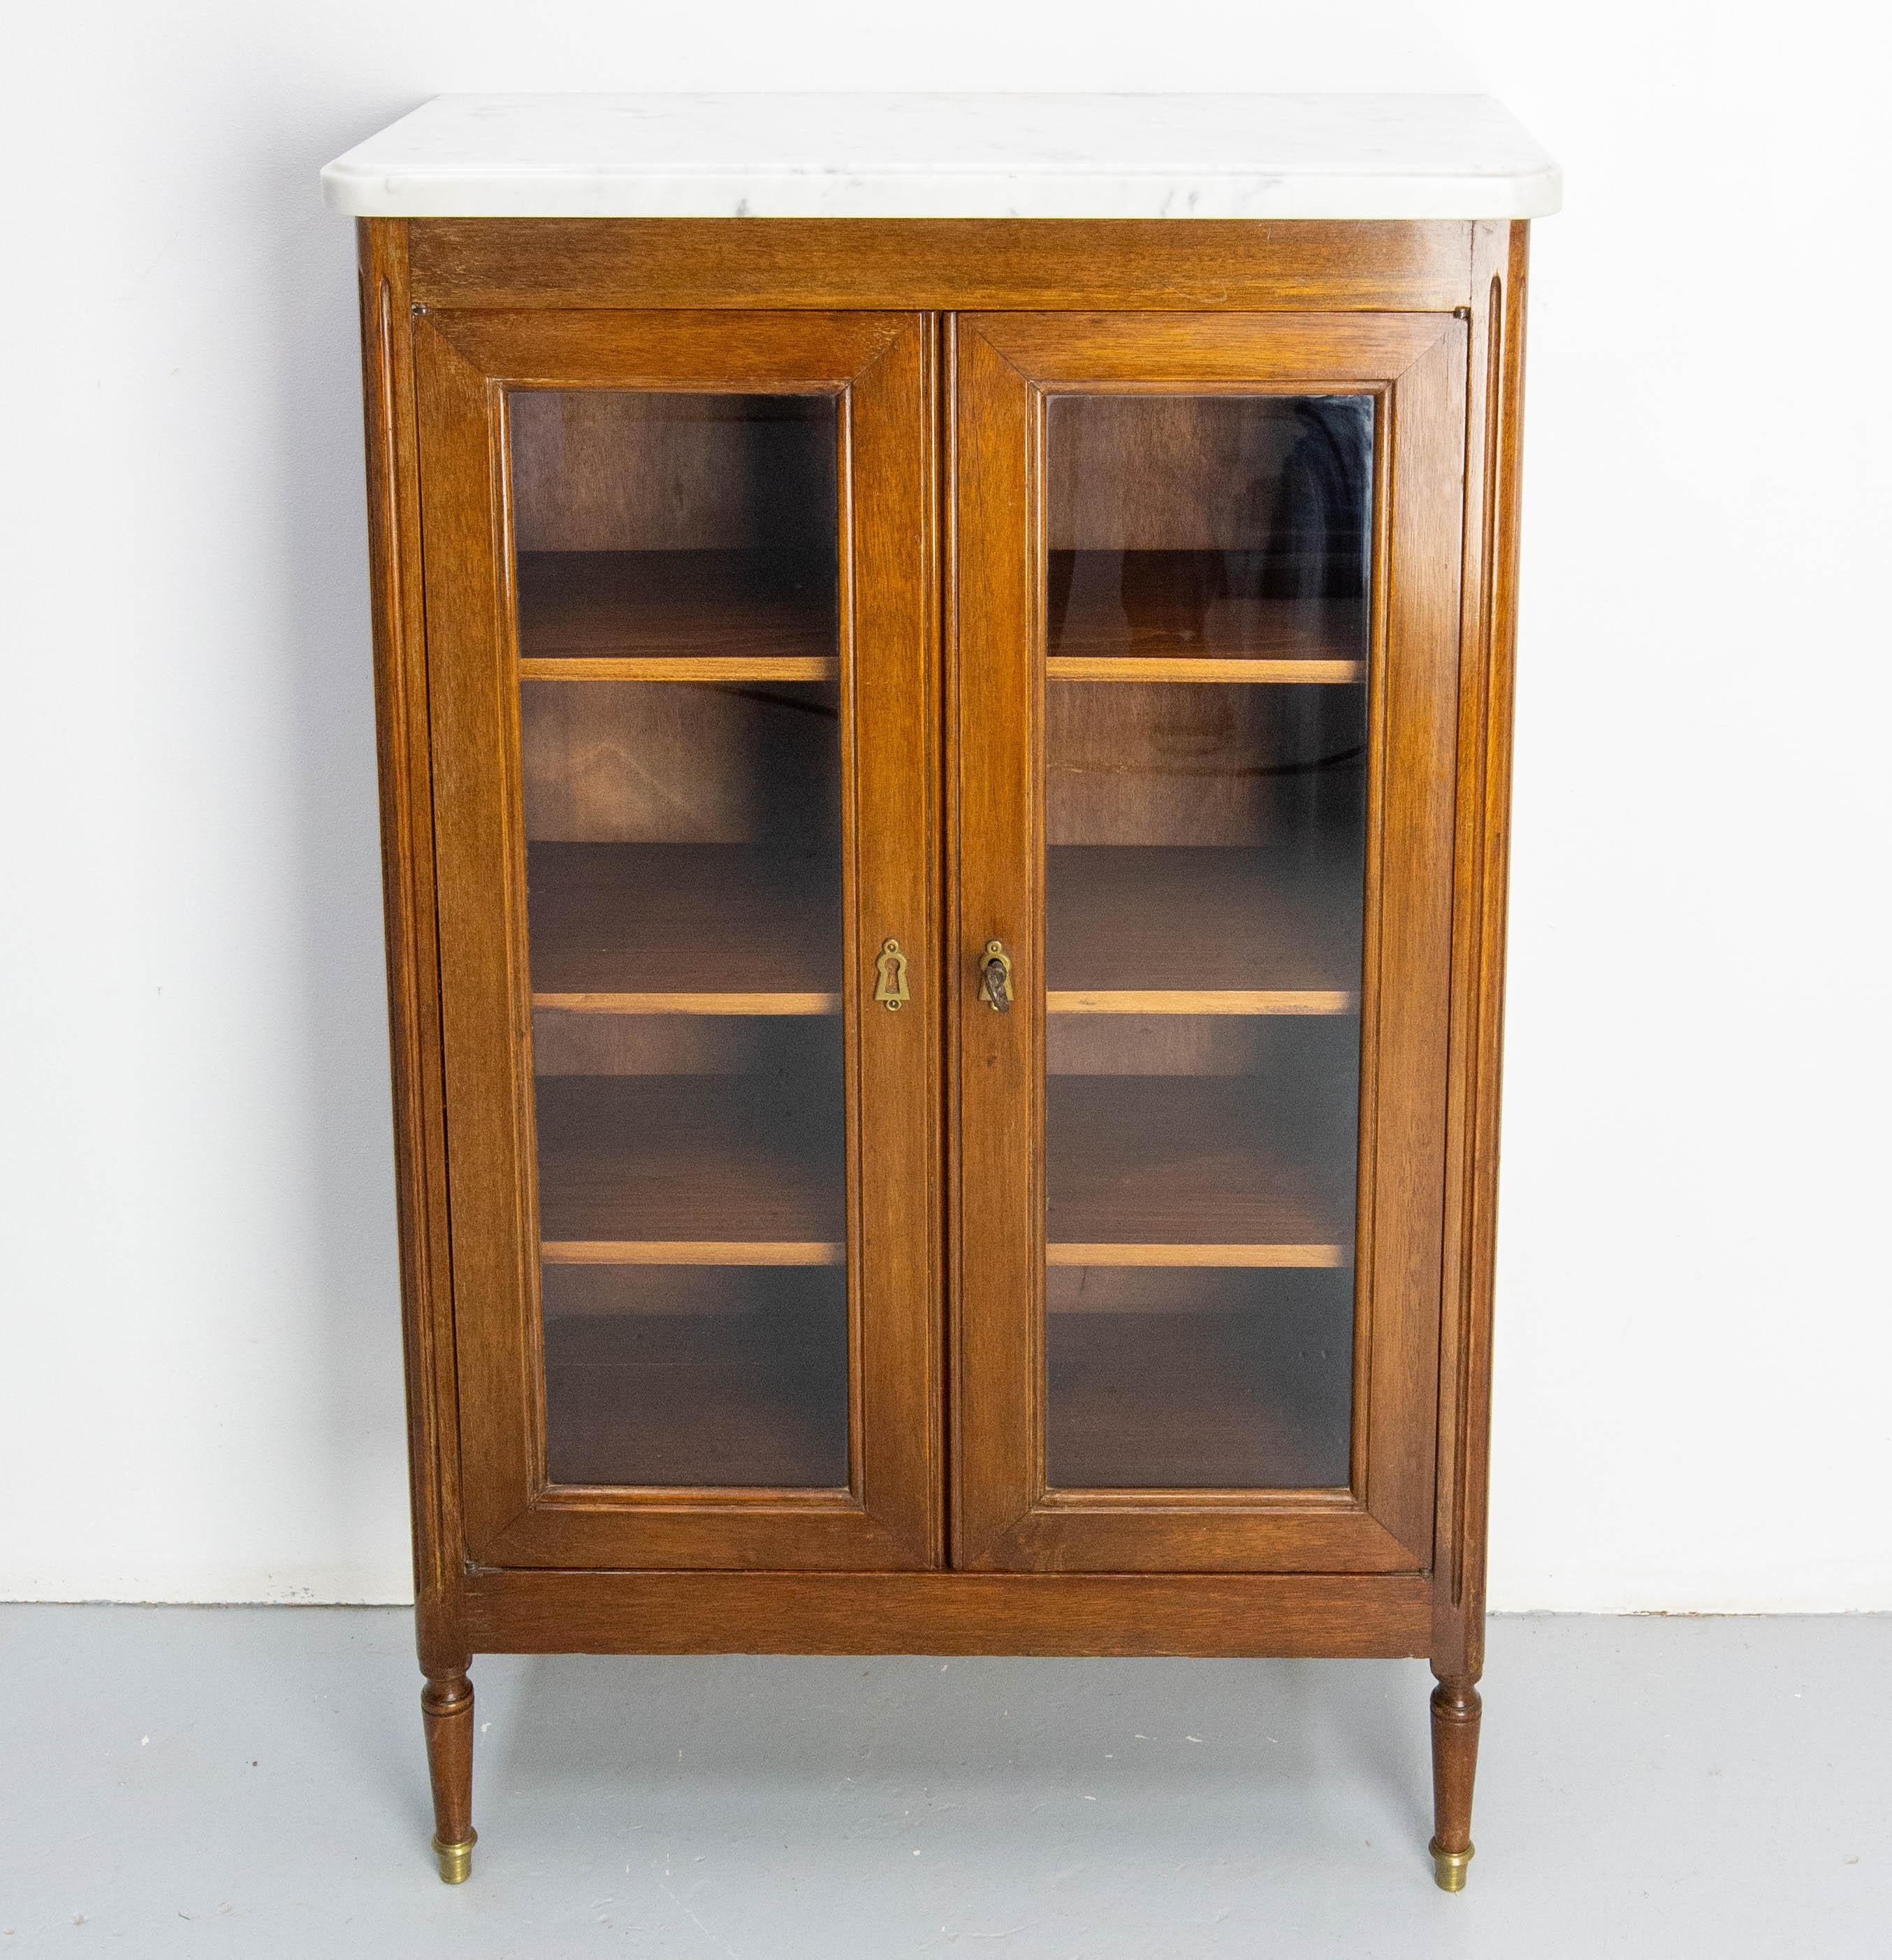 This French cabinet in massive wood with glass vitrine three shelves and two doors. 
Made circa 1920. Wood, brass, marble and glass.
Good condition signs of use (please see the side photos).

Shipping:
27 / 61 / 97 cm 24 kg.